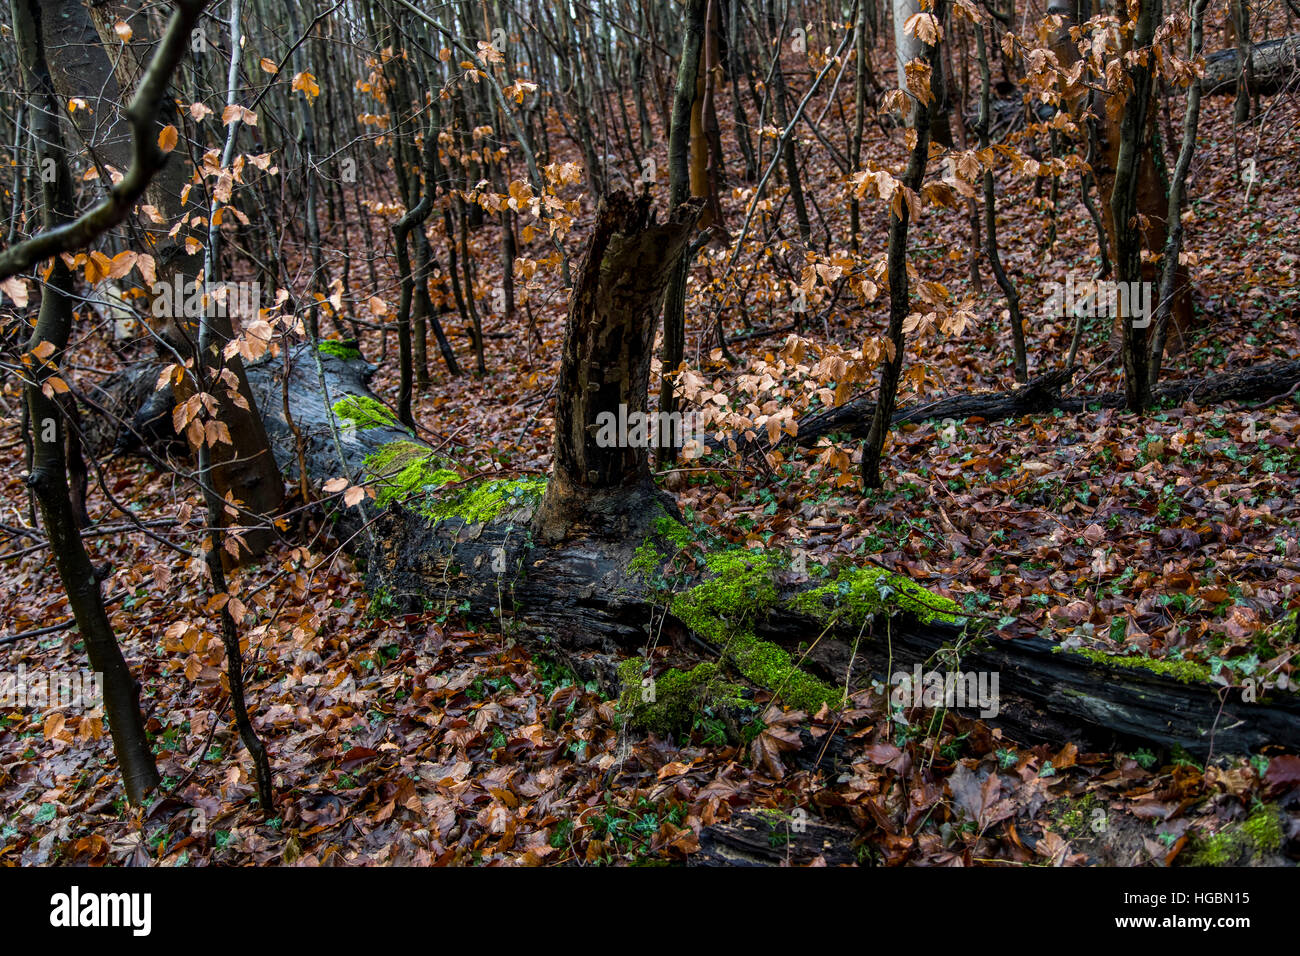 Forest in winter, moss and leaves on dead trees, tree branches, tree trunks, Stock Photo